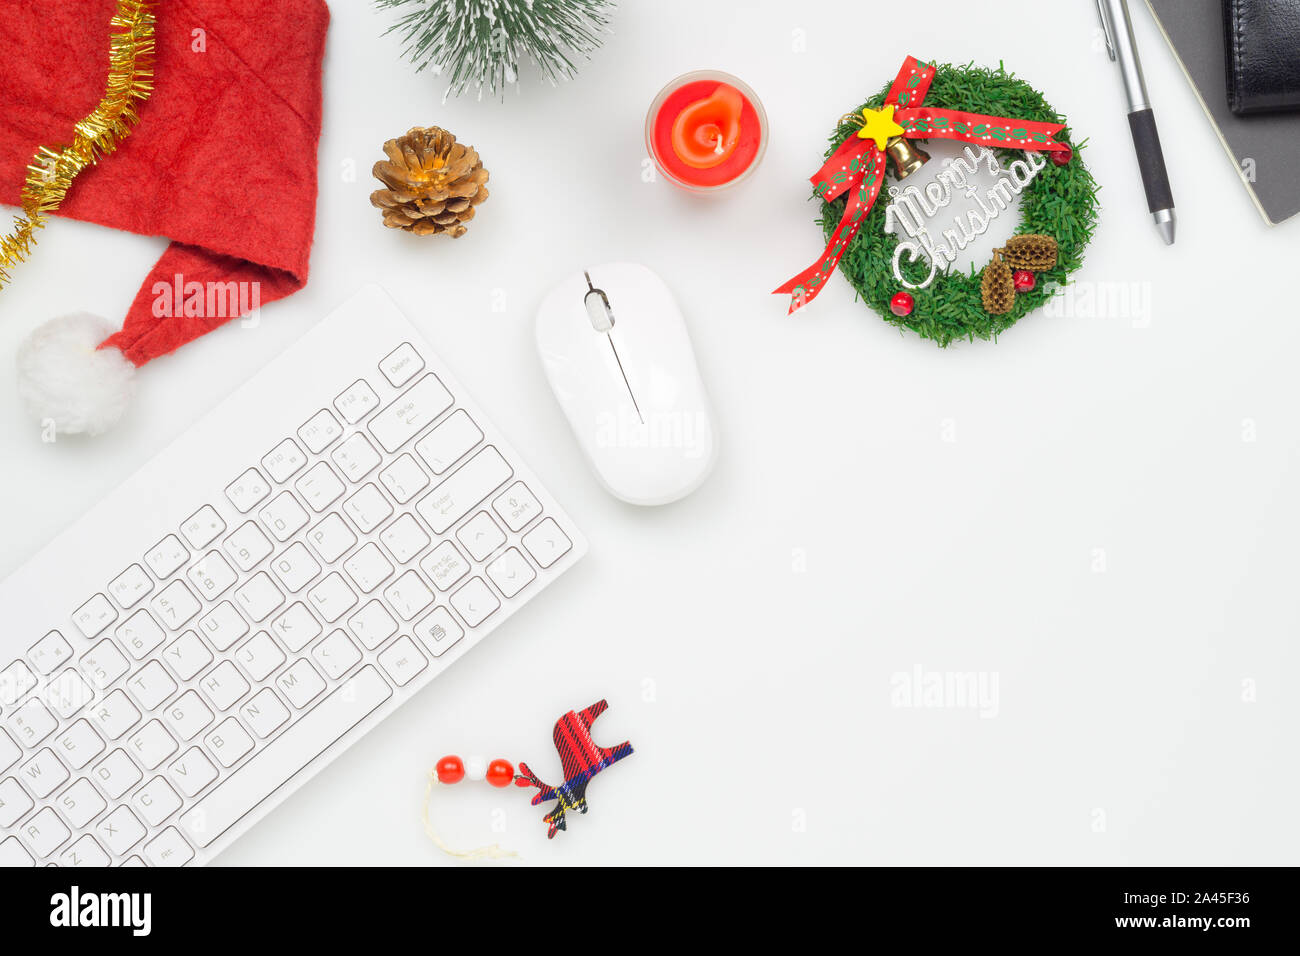 Flat Lay Top View Christmas Office Table Desk Party Concept